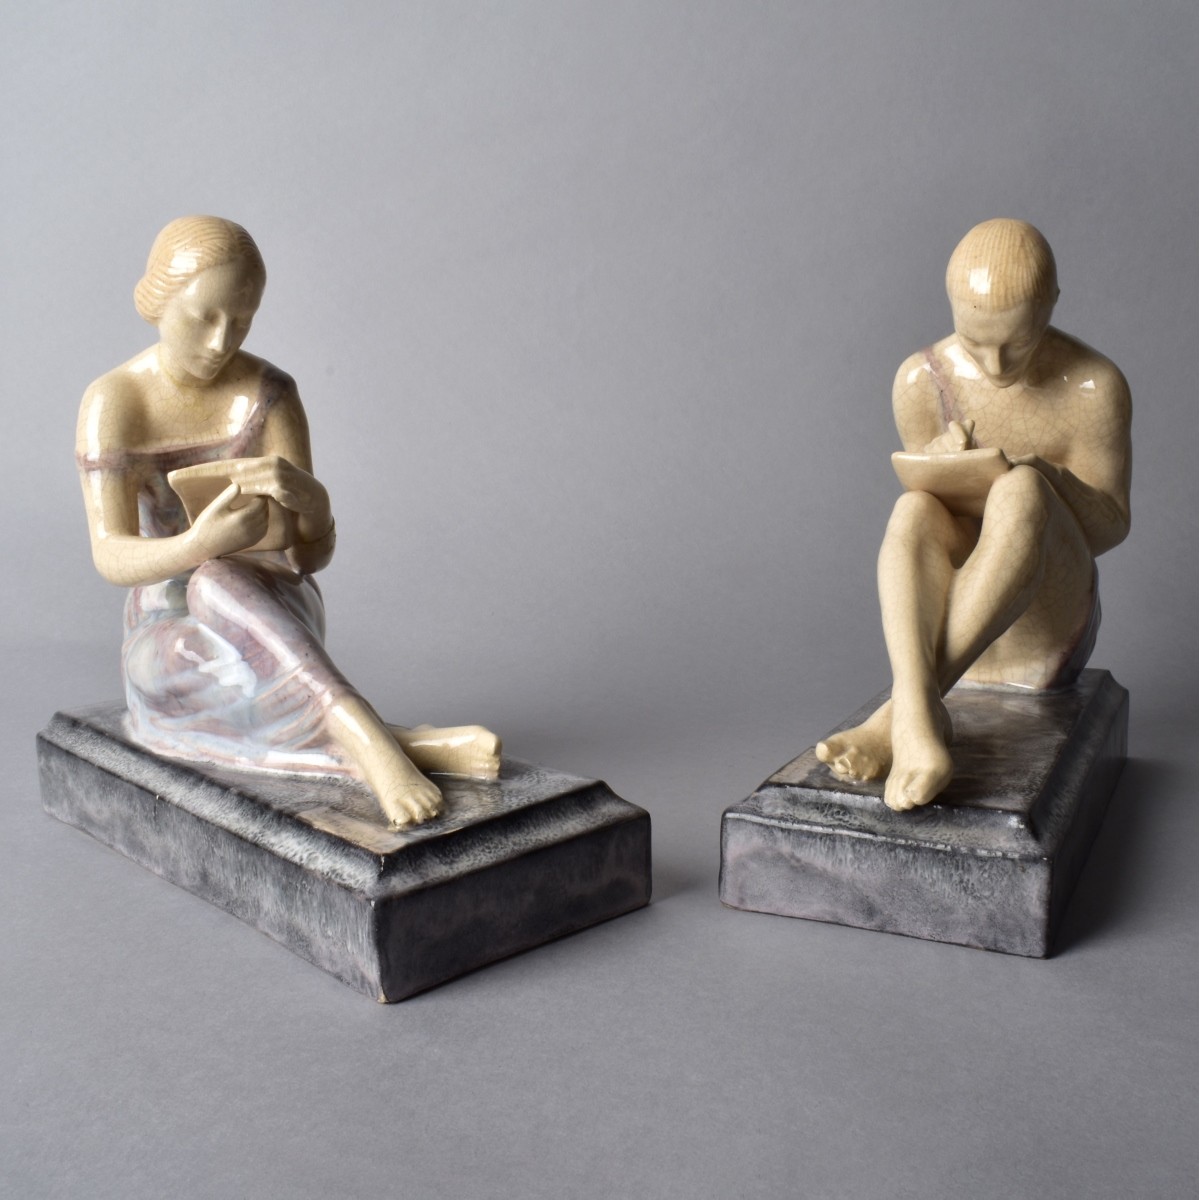 Pierre Le Faguays (French 1892-1962) Figurines